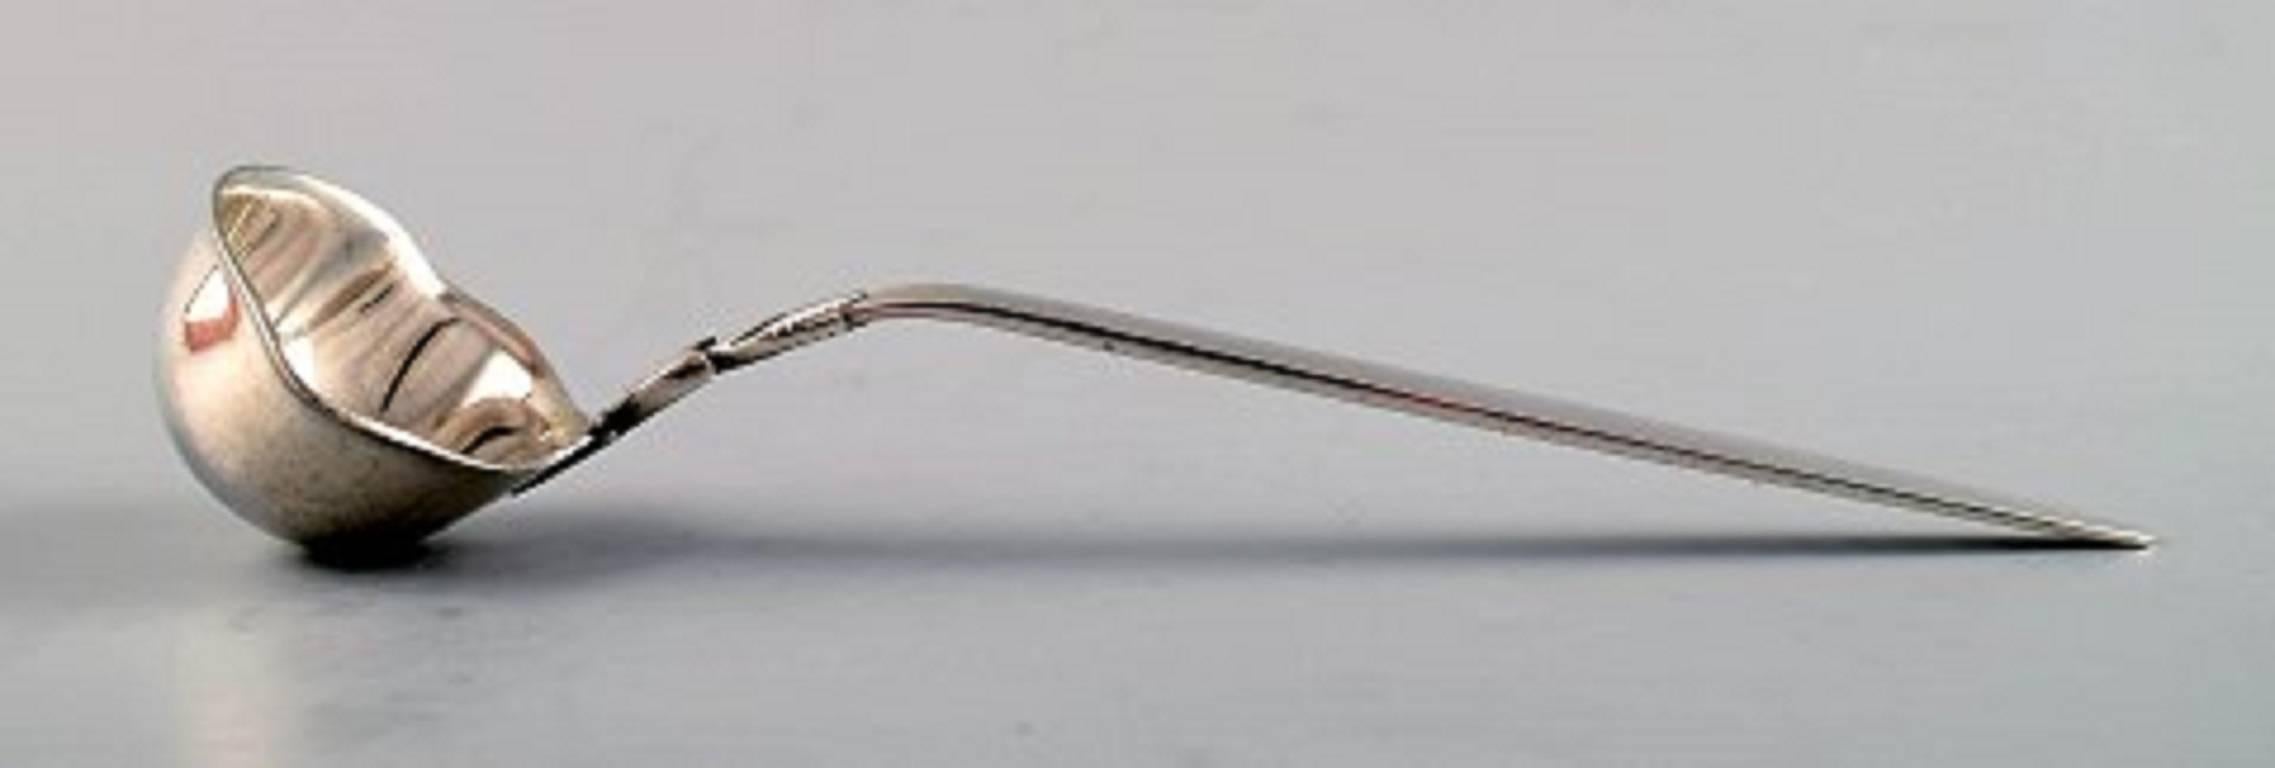 Georg Jensen cactus sterling silver sauce or butter spoon.
Stamped: GJ. Sterling. Import stamps.
Measures: Length 15 cm.
In very good condition.